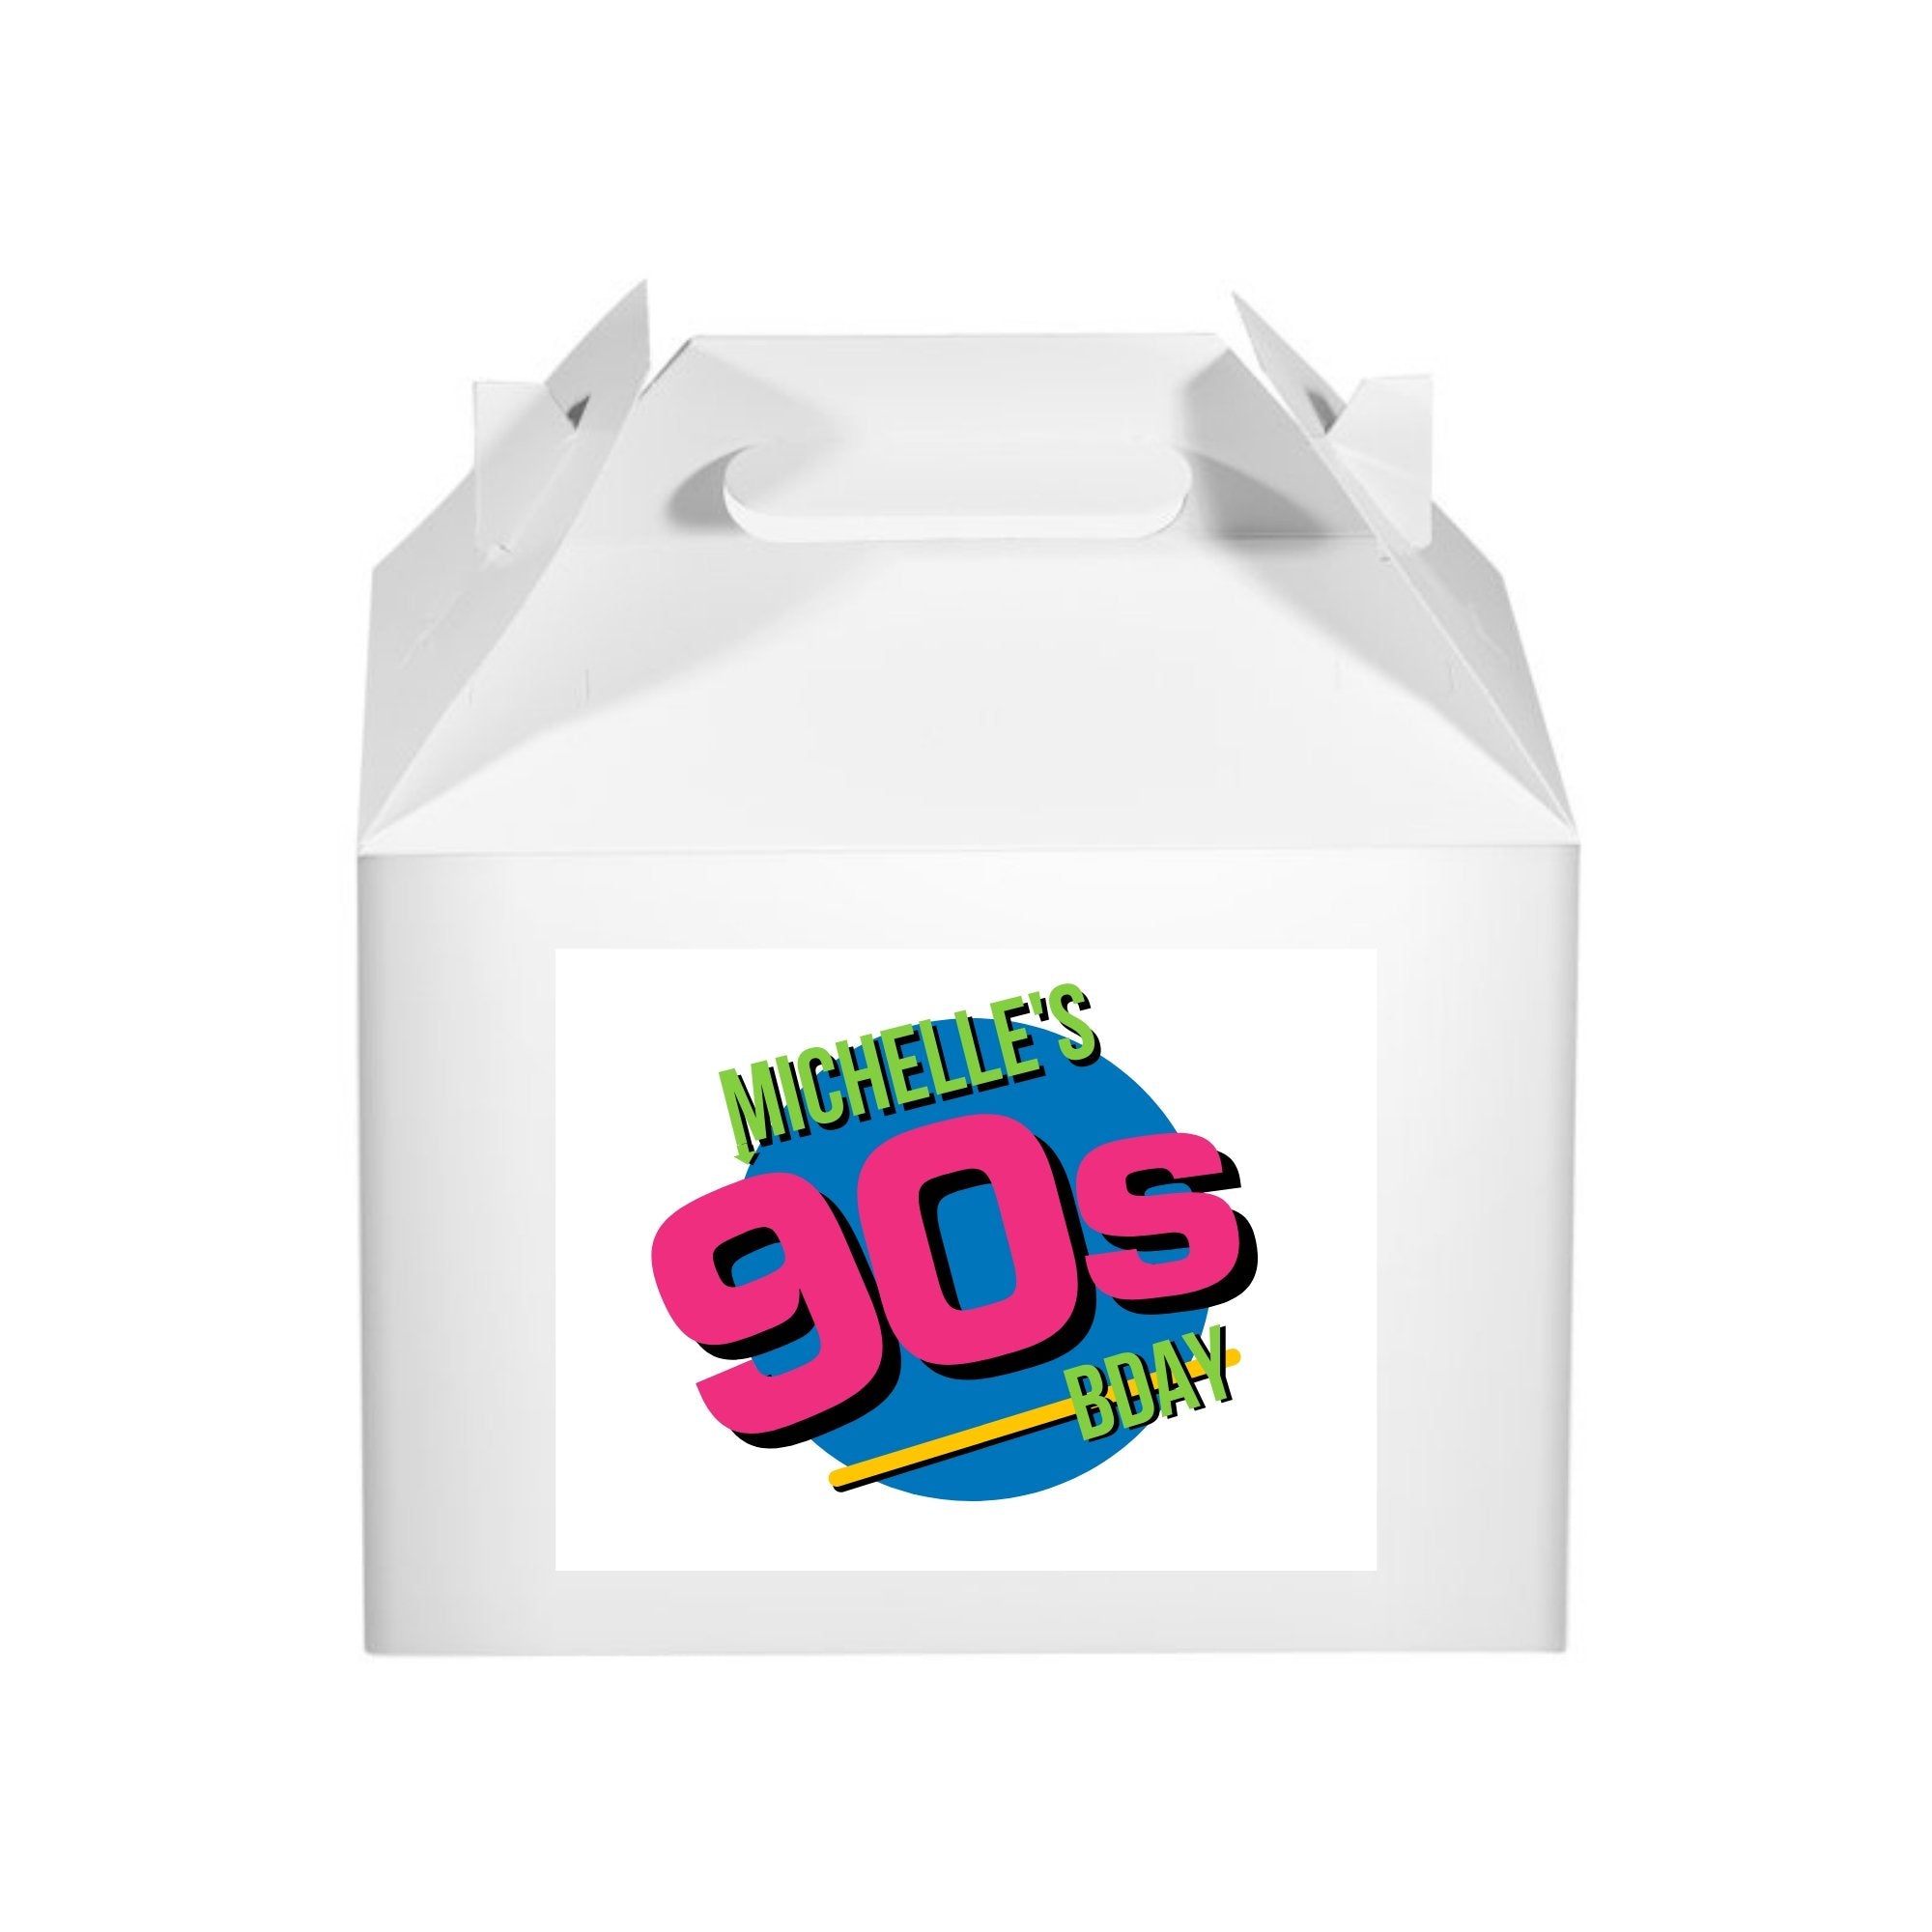 A white treat or favor box is customized with a 90's logo